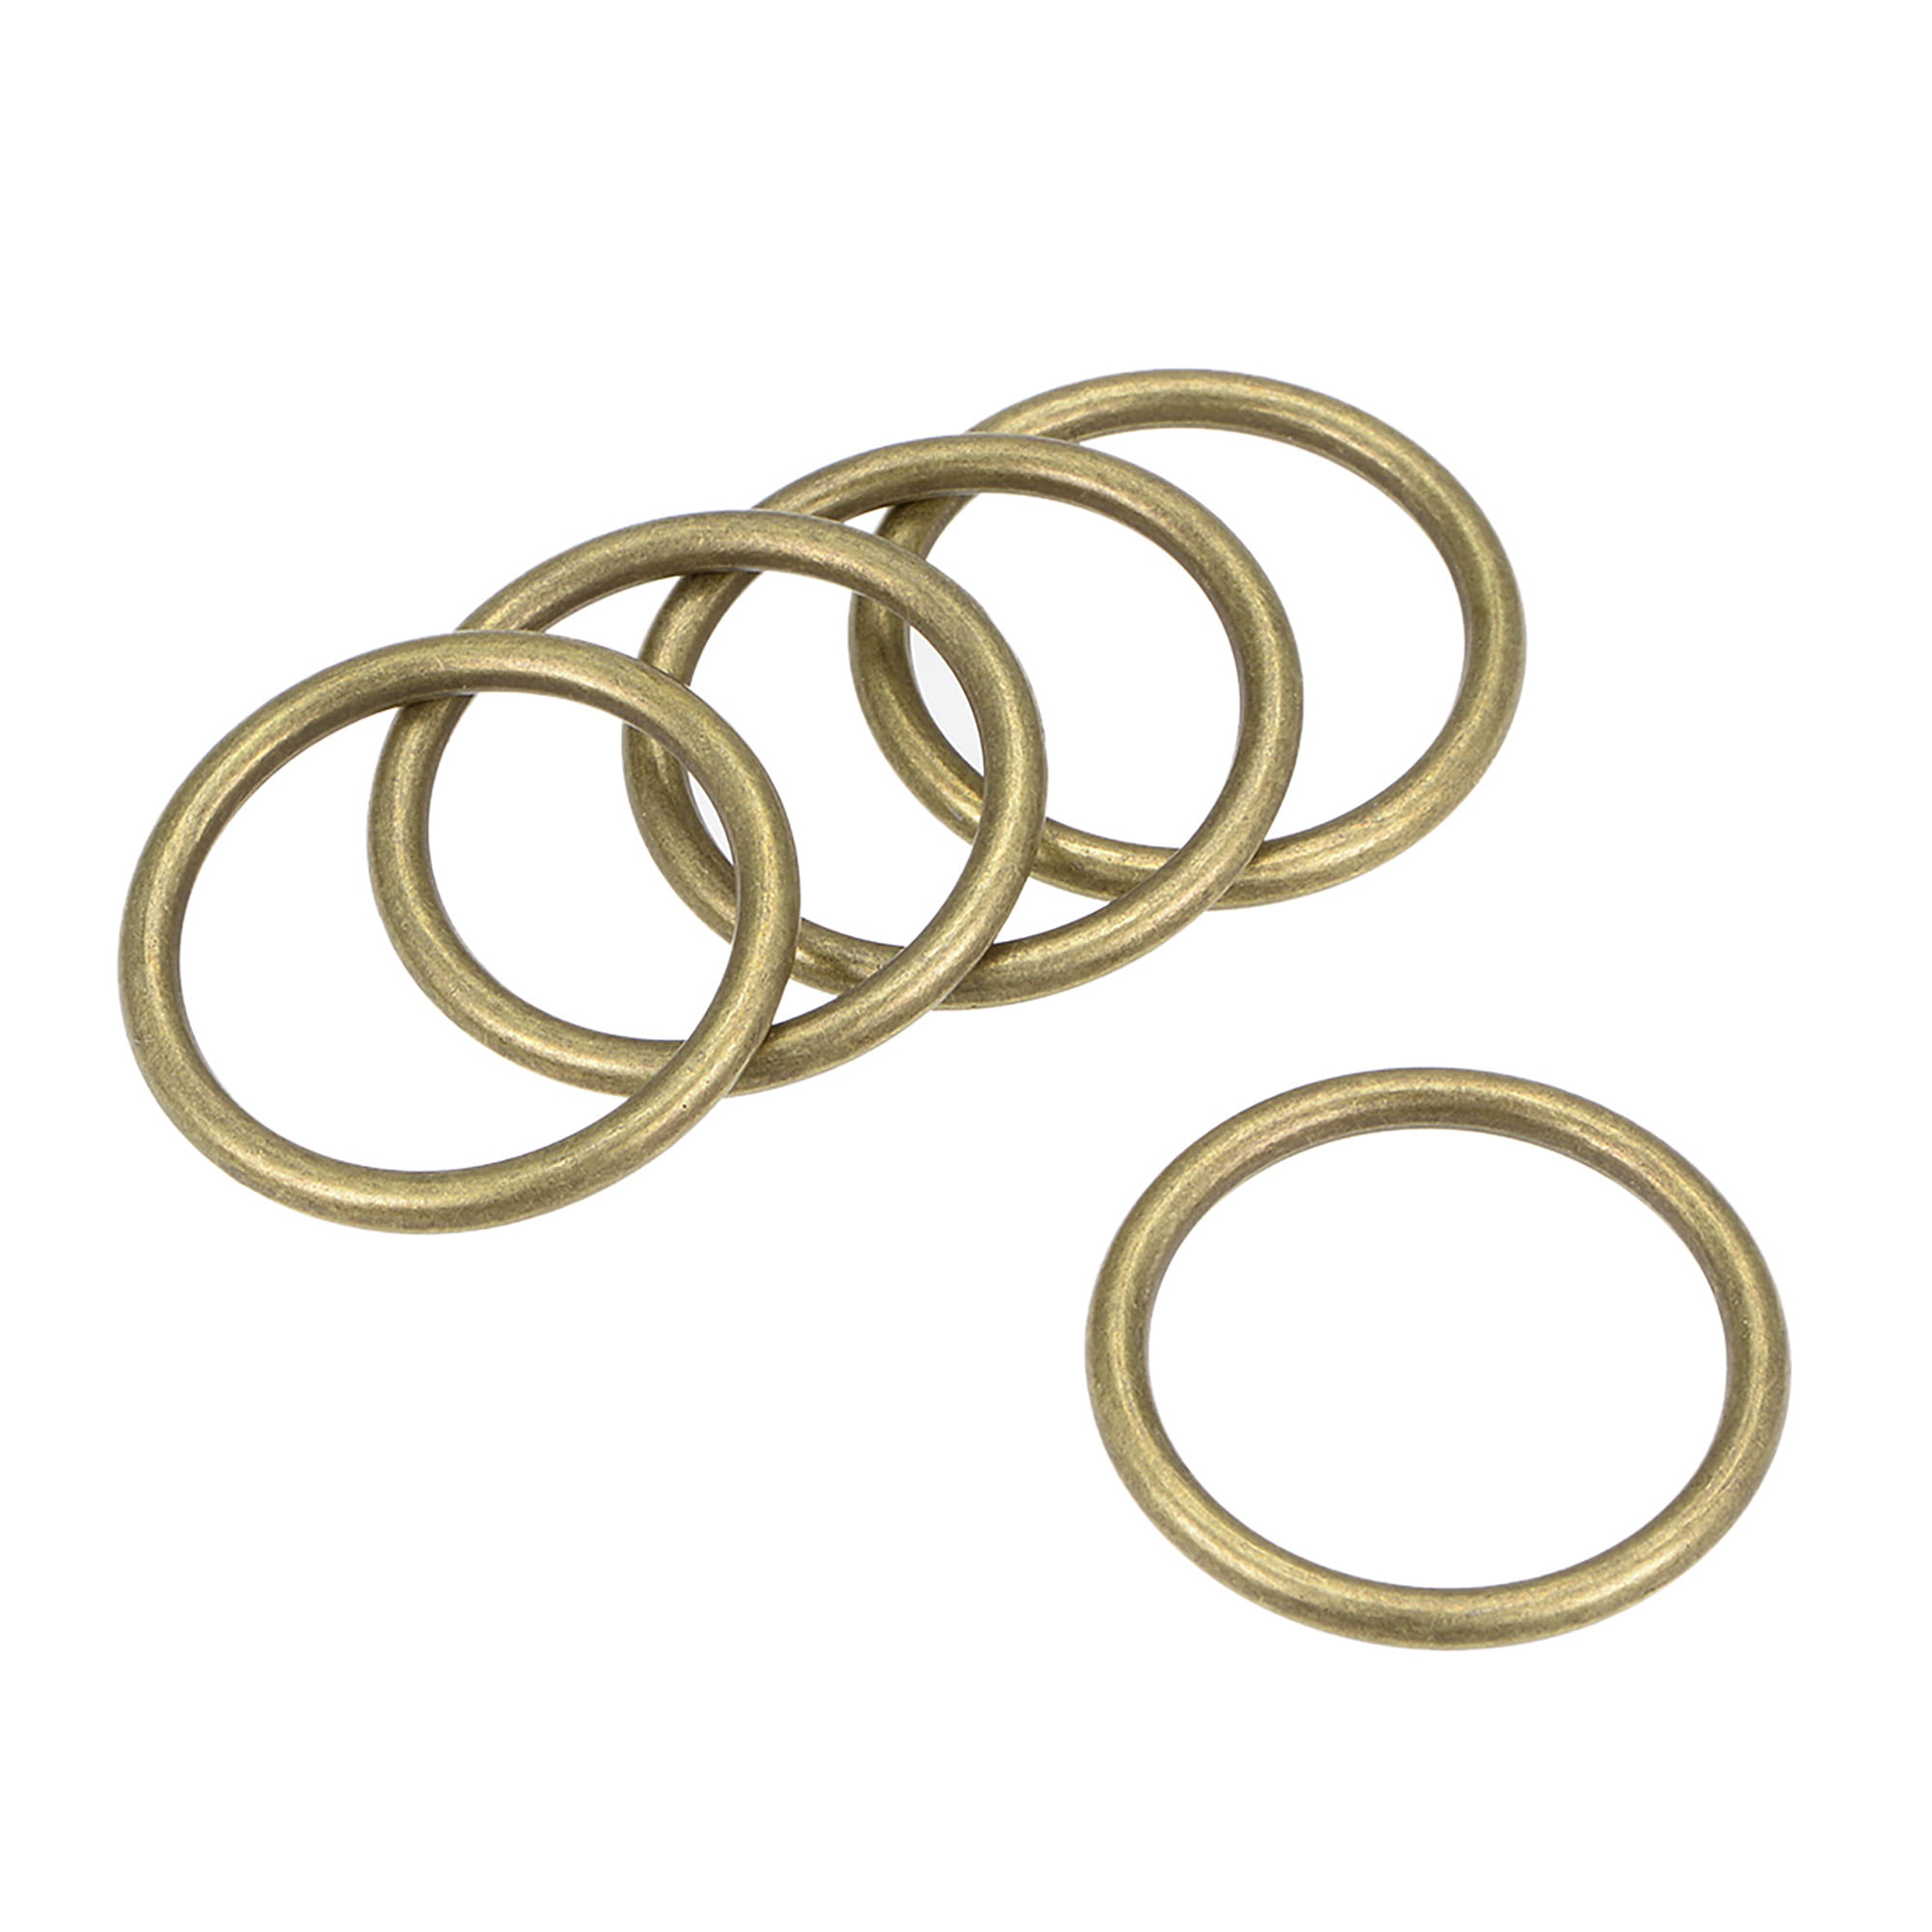 O-Rings Gold Tone for Hardware Bags Craft DIY 10 Pcs O Ring Buckle 1" 25mm 